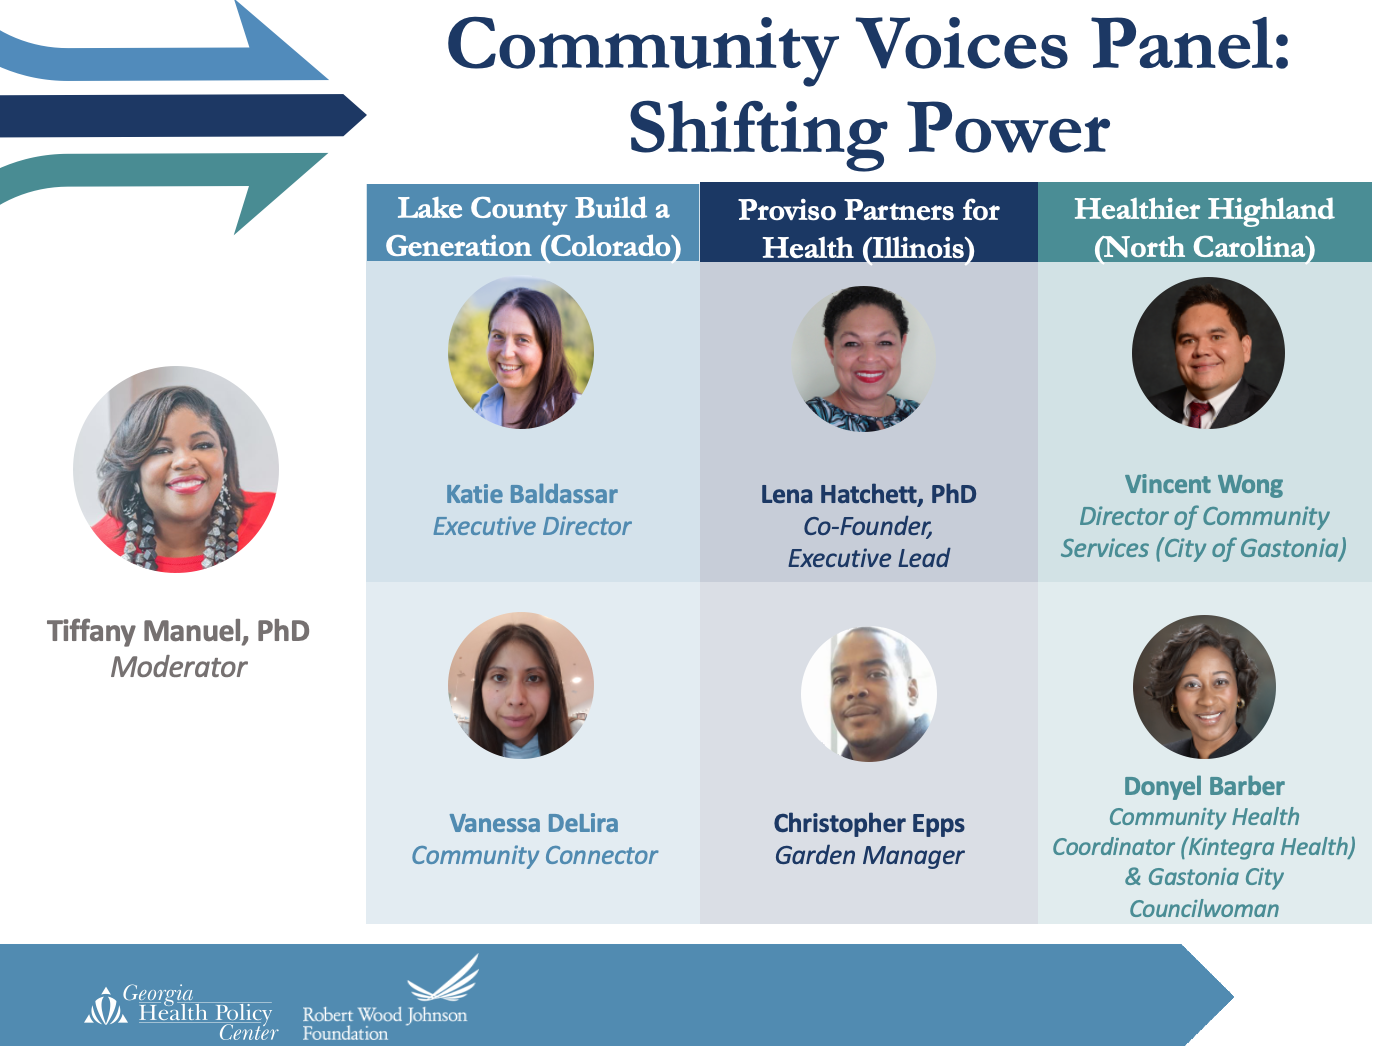 Community Voices Panel: Shifting Power